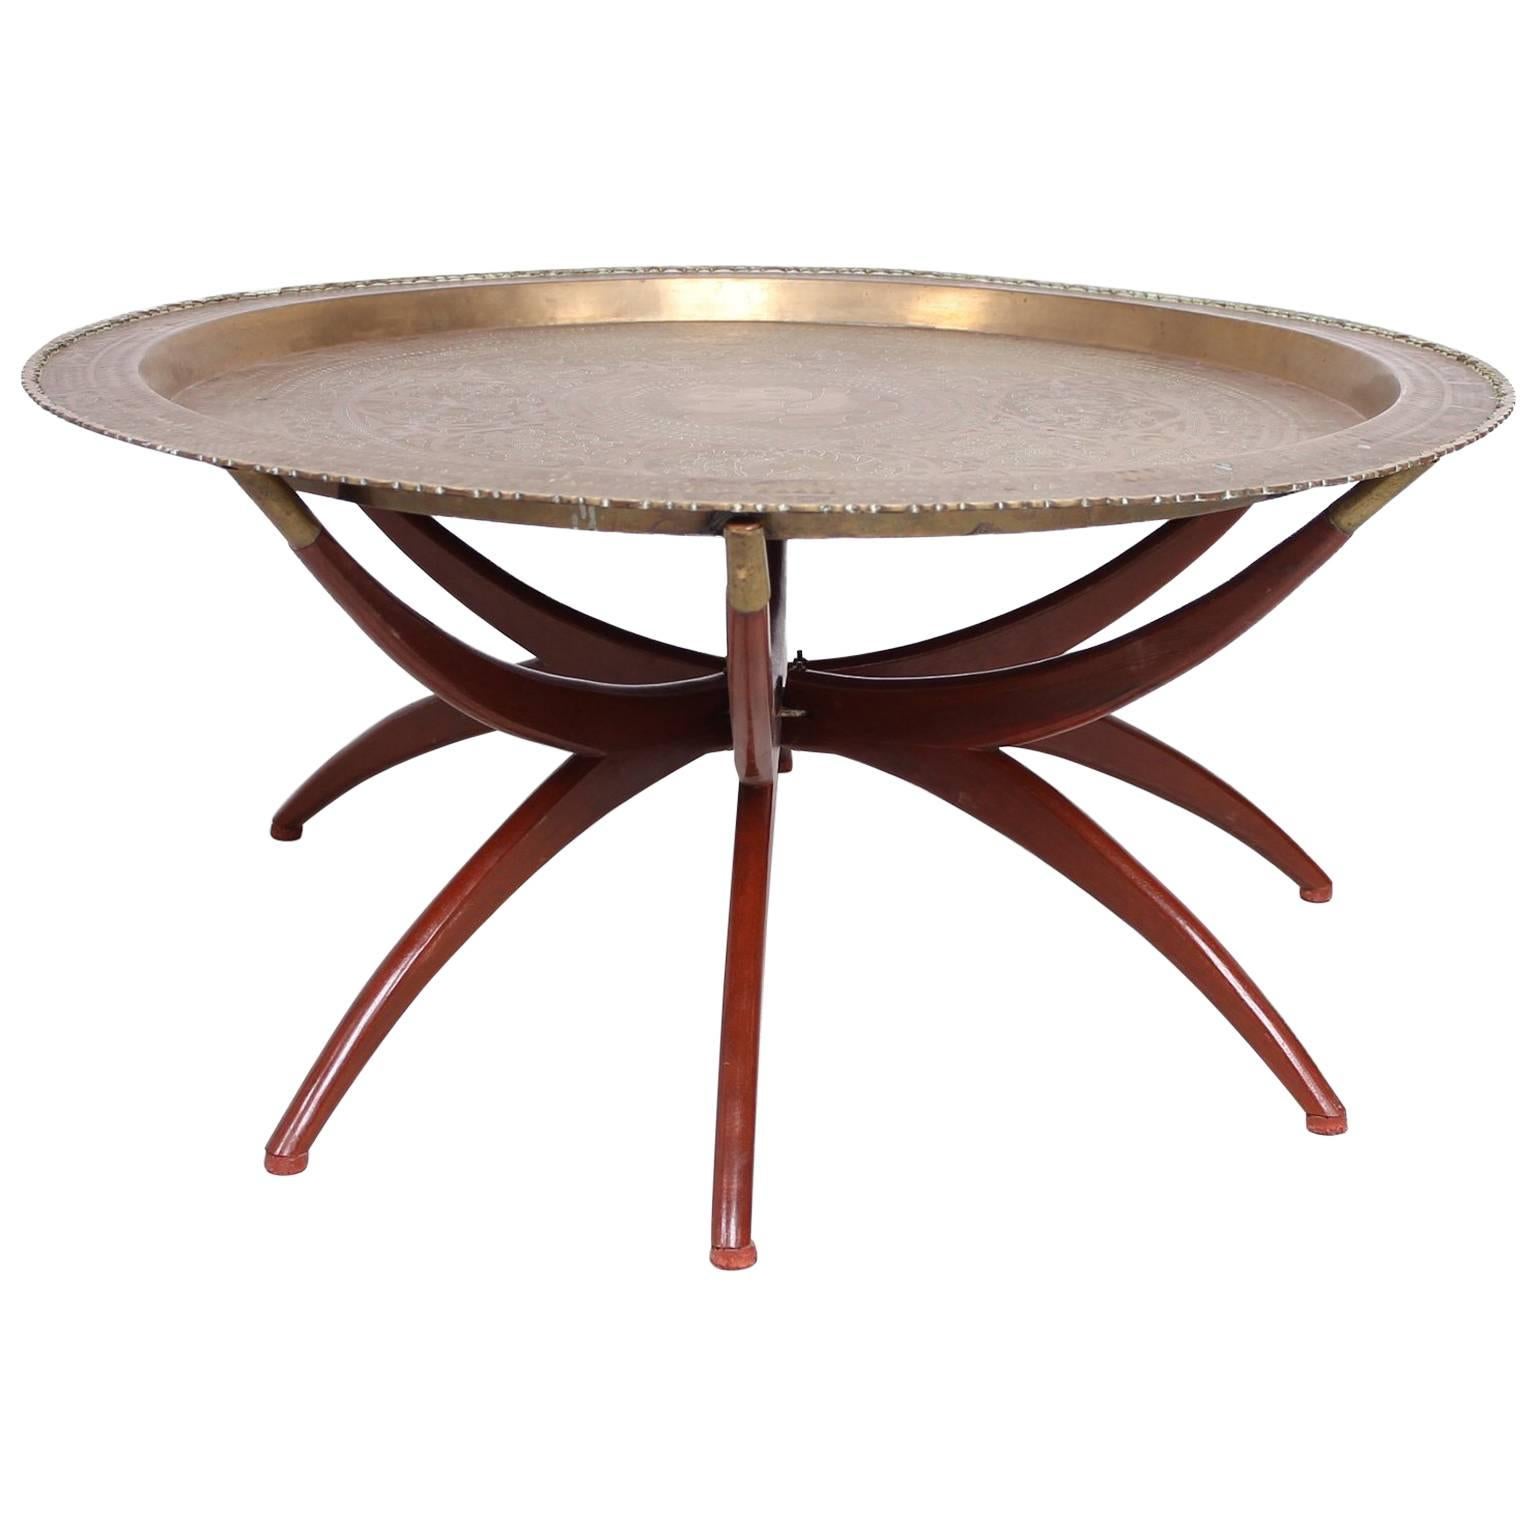 Moroccan Brass Tray Table on Folding Stand, 1960s, Mid-Century